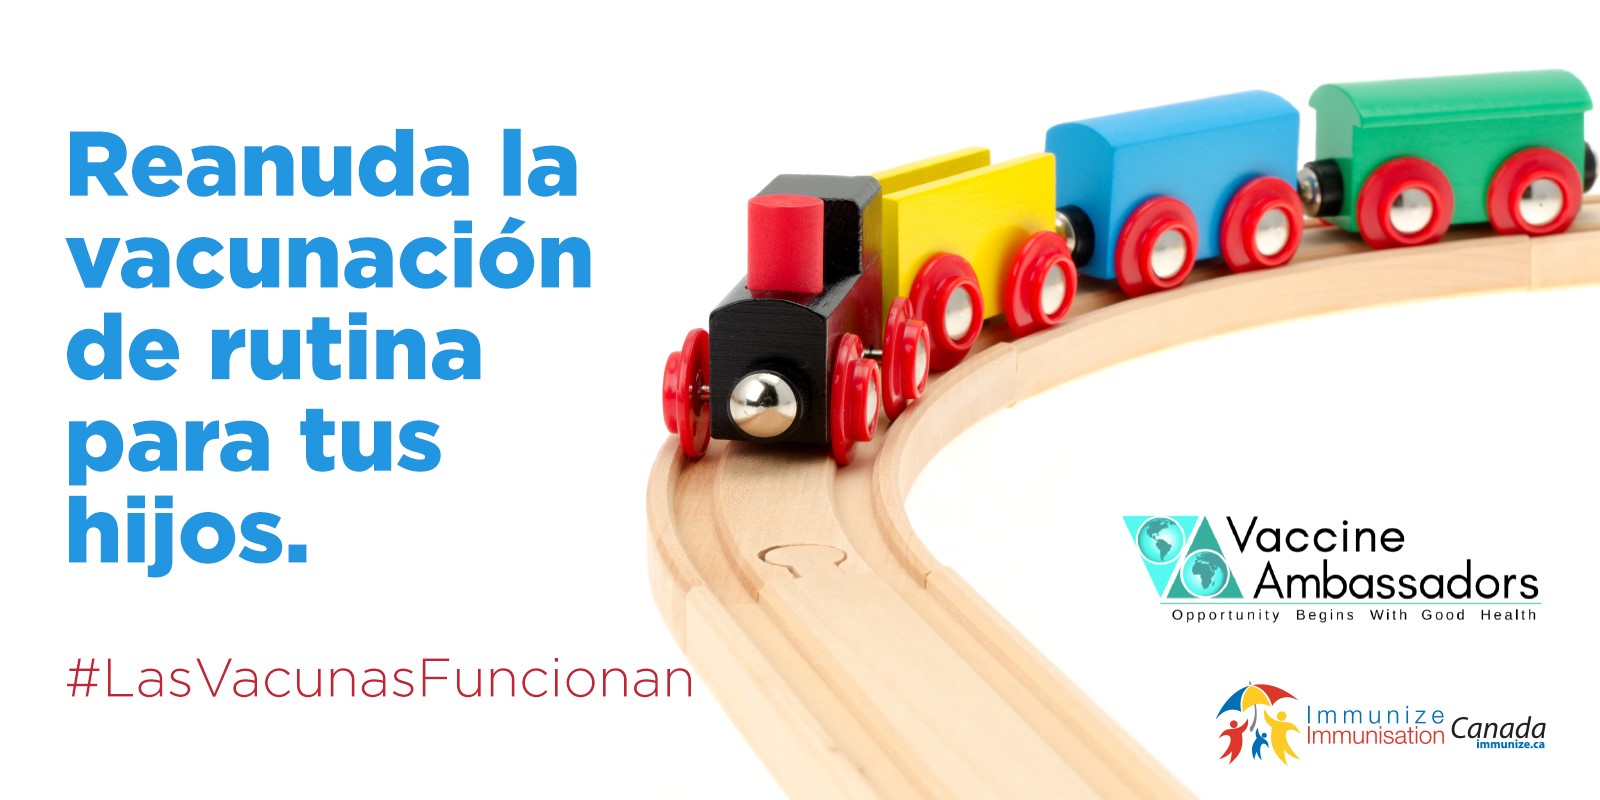 Get back on track with routine vaccines for your kids - Spanish